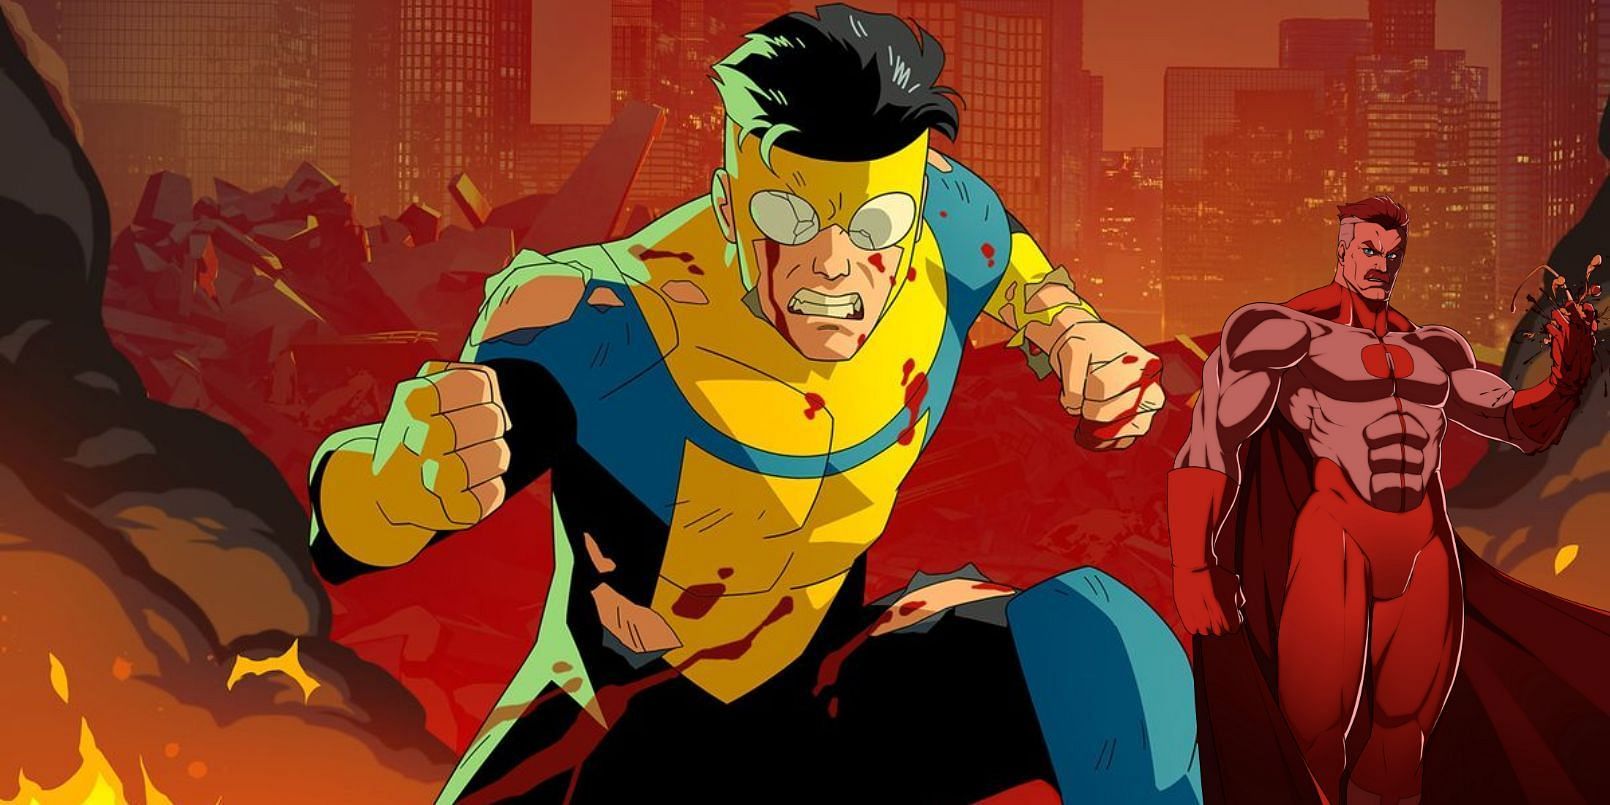 Invincible season 2 complete release schedule: All episodes and when they  arrive